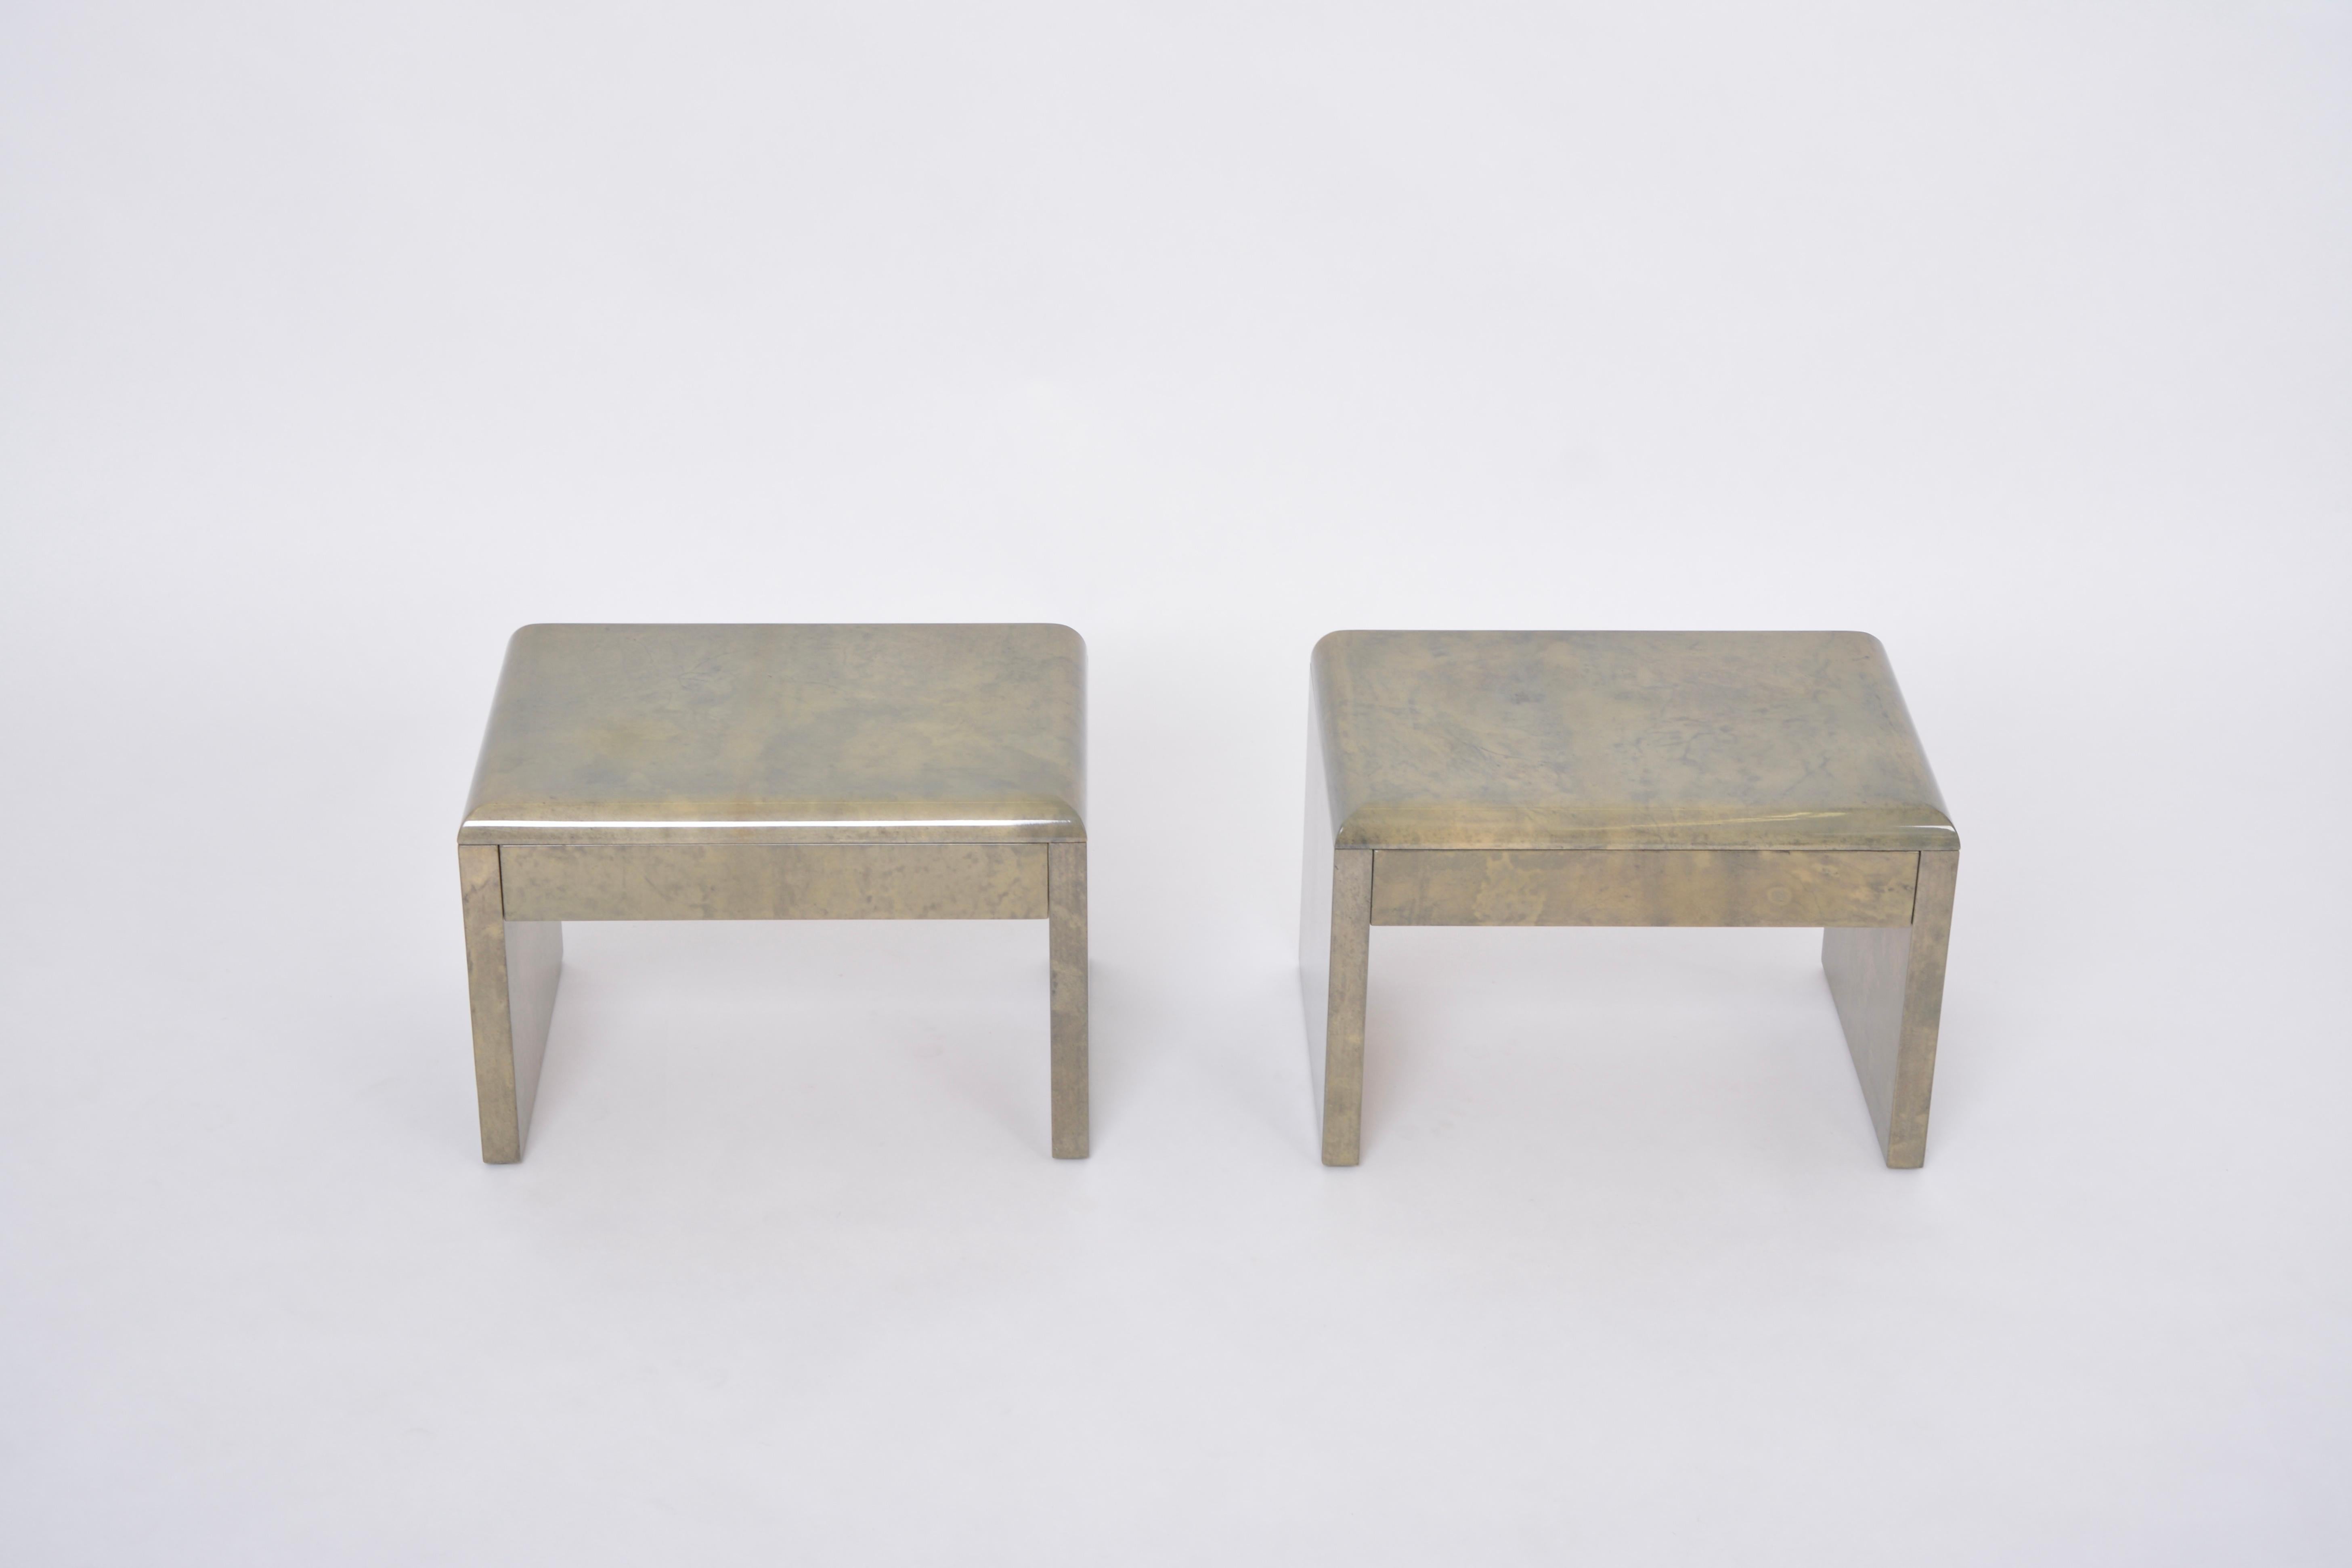 Lacquered Mid-Century Modern Bedside Tables Made of Laquered Goat Skin by Aldo Tura